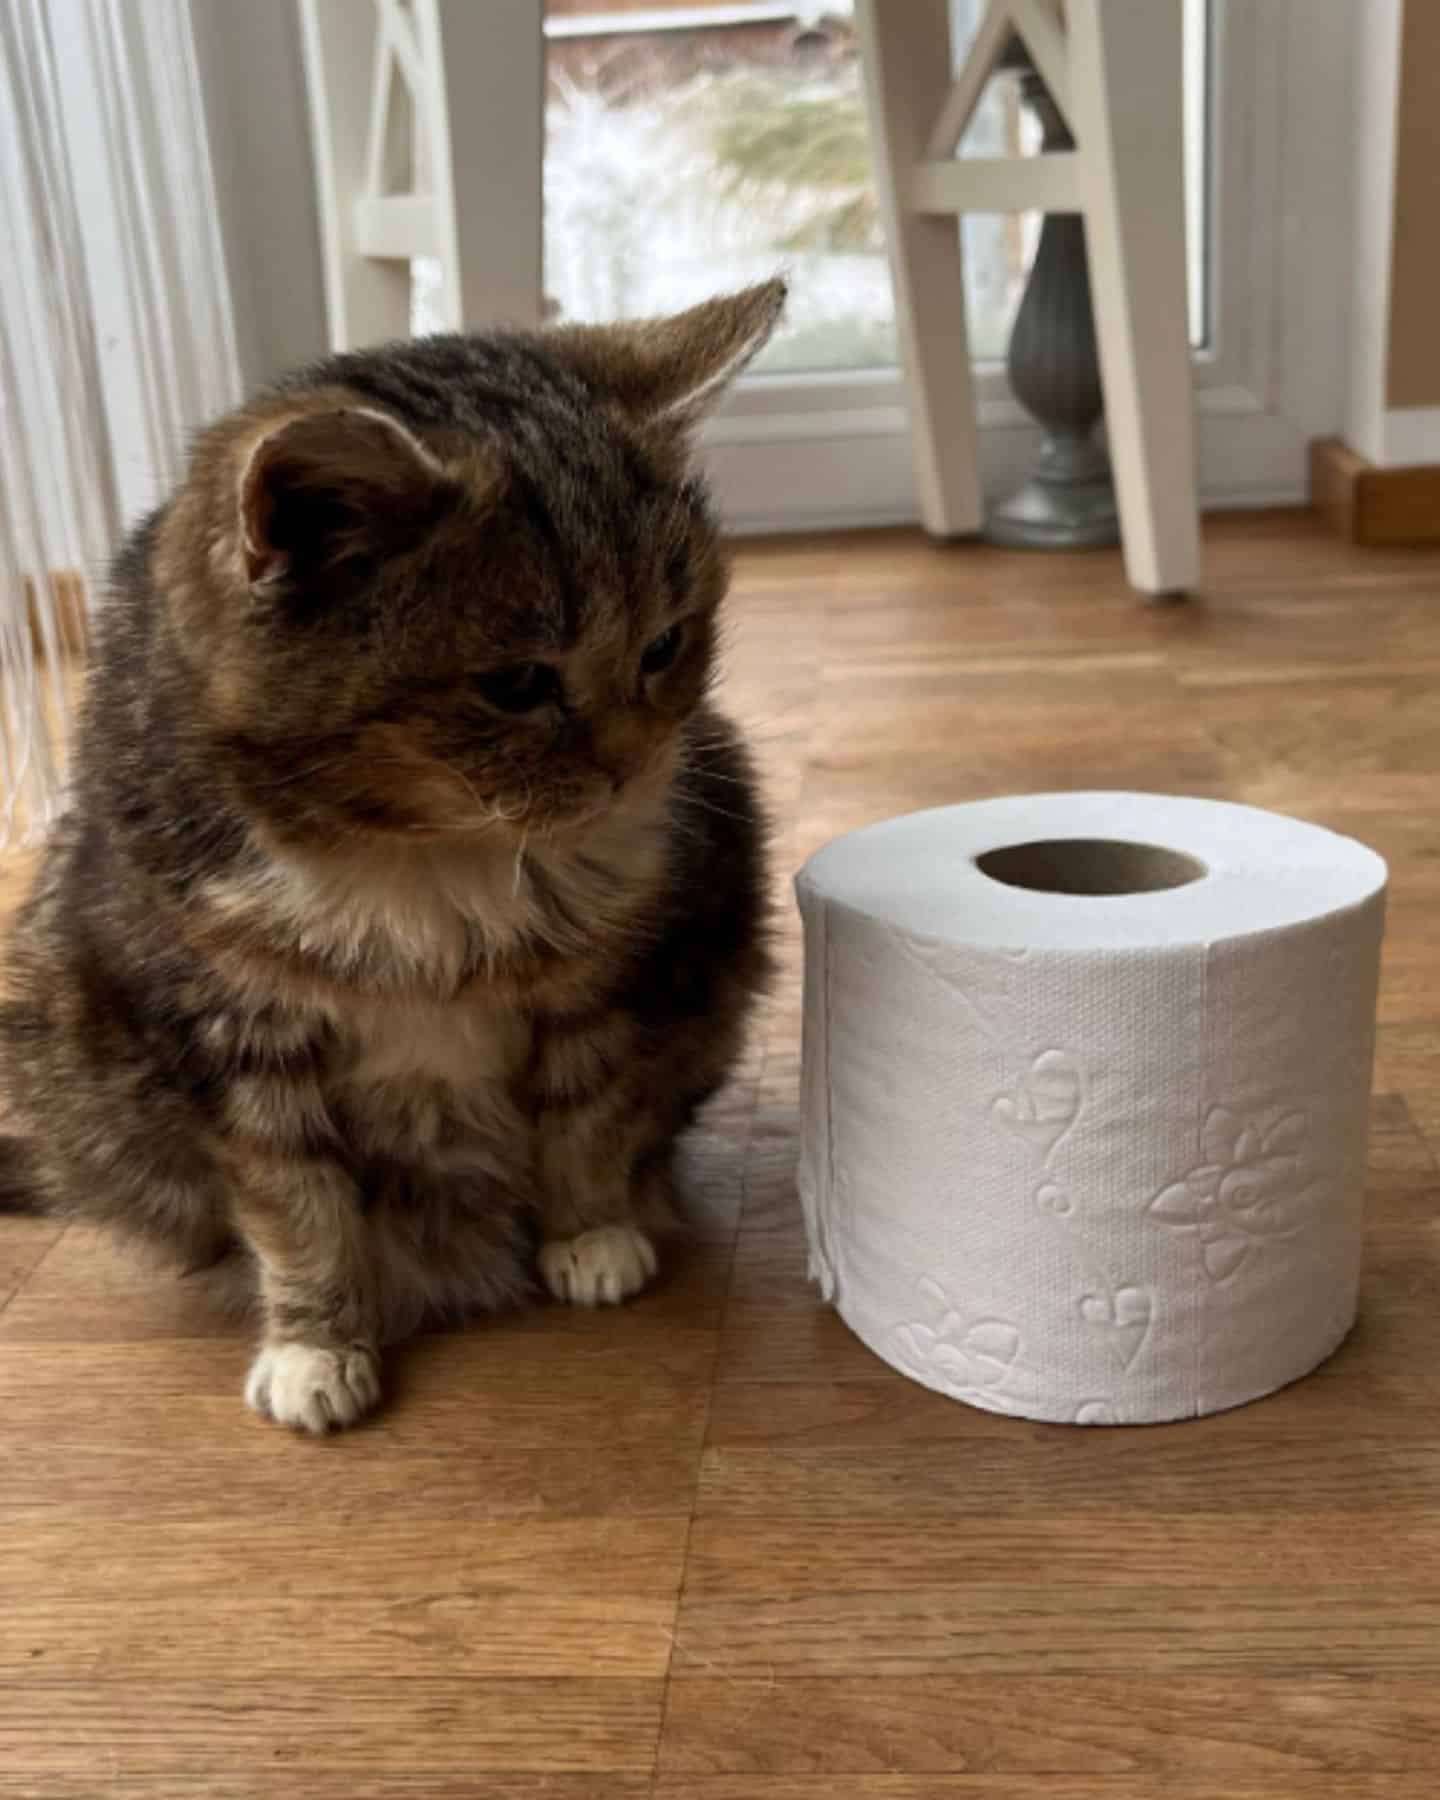 cat with dwarfism next to toilet paper